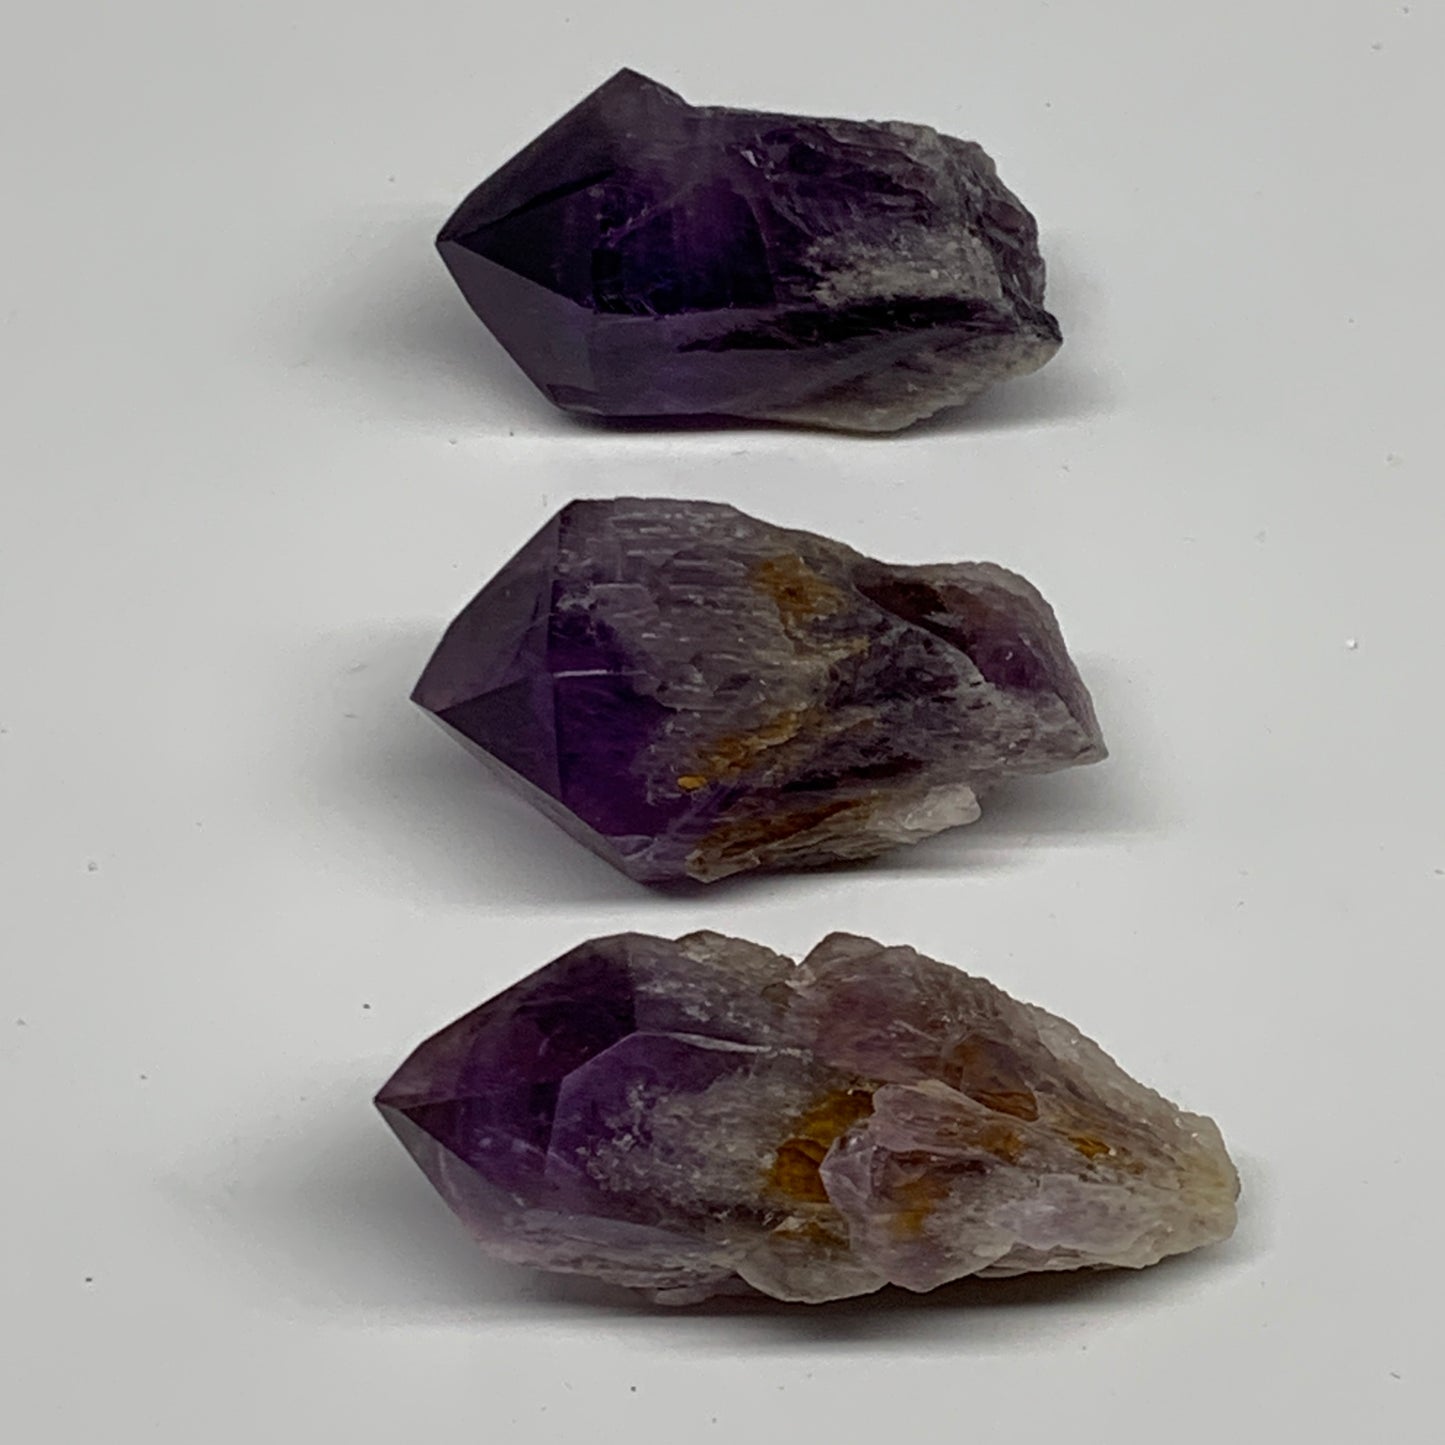 125.7g, 2" - 2.4", 3pcs, Amethyst Point Polished Rough lower part, B32395